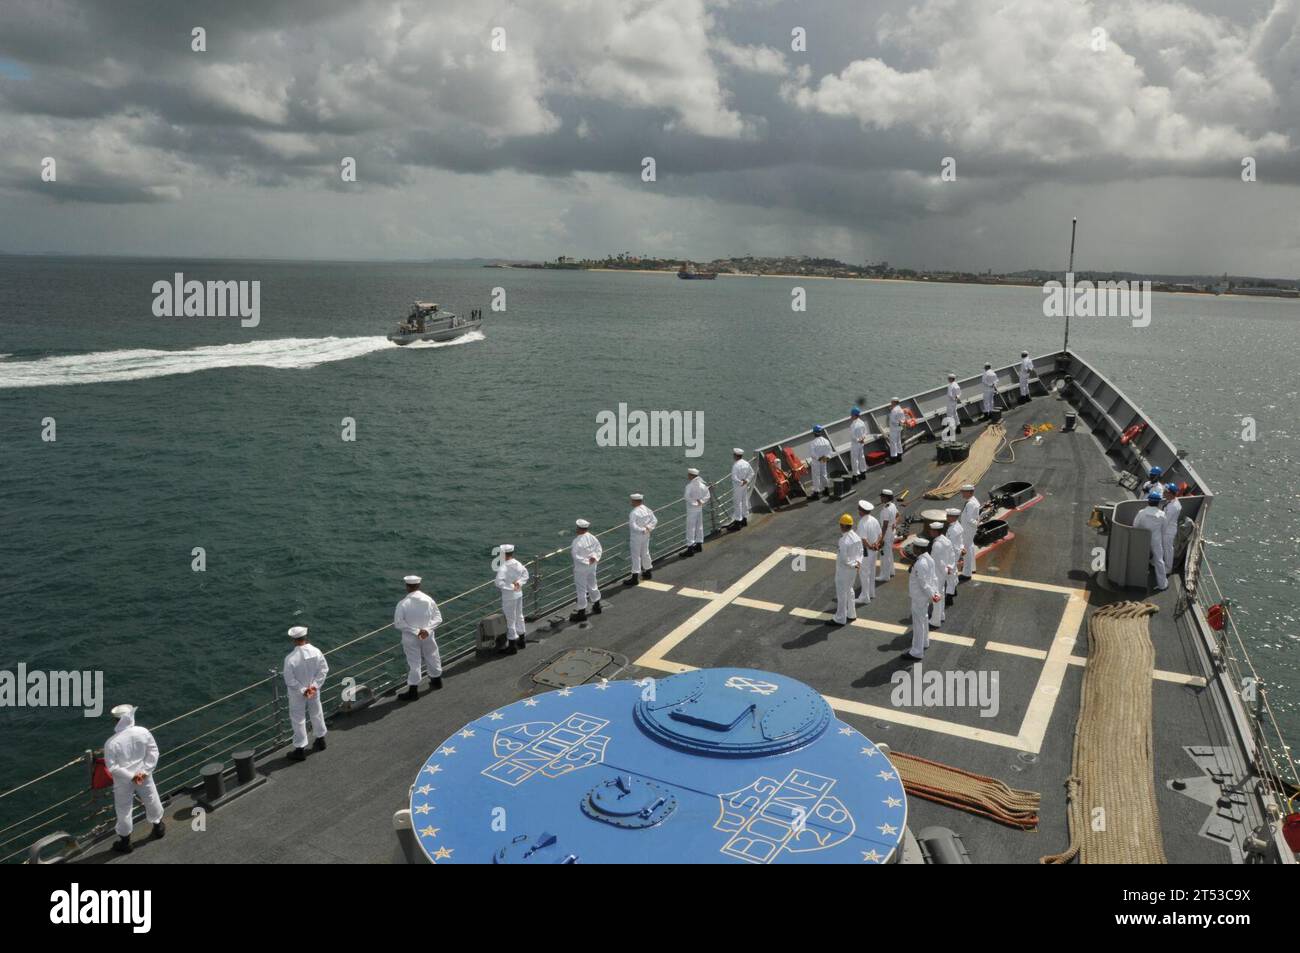 Brazil, Frigate, Guided-Missile, navy, Sailors, SALVADOR, Southern Seas 2011, U.S. Navy, USS Boone (FFG 28) Stock Photo